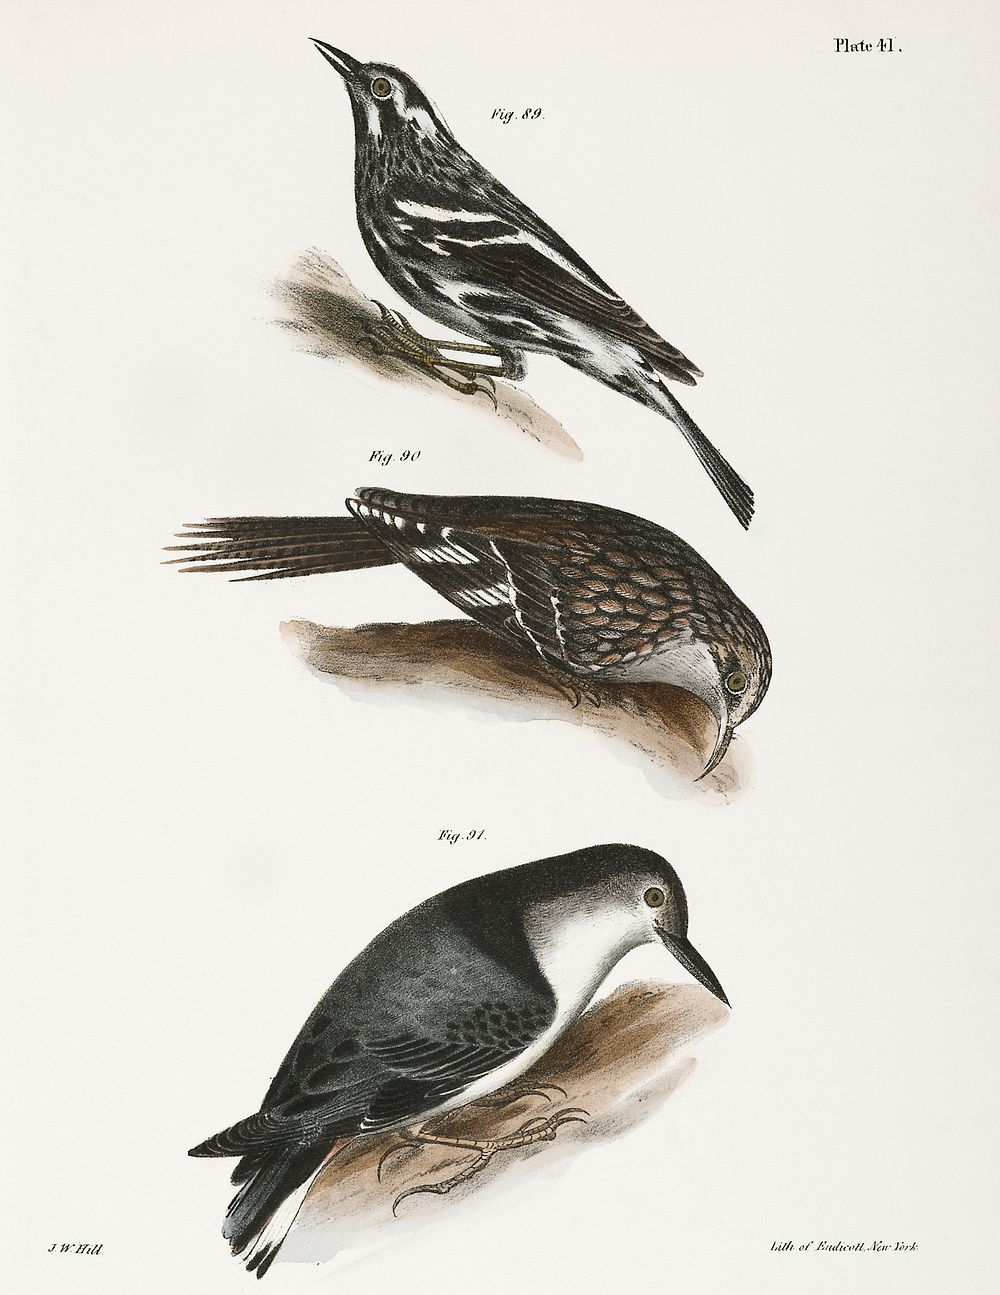 89. The Varied Creeping Warbler (Mniotilta varia) 90. The Brown Creeper (Certhia americana) 91. The White-breasted Nutchatch…